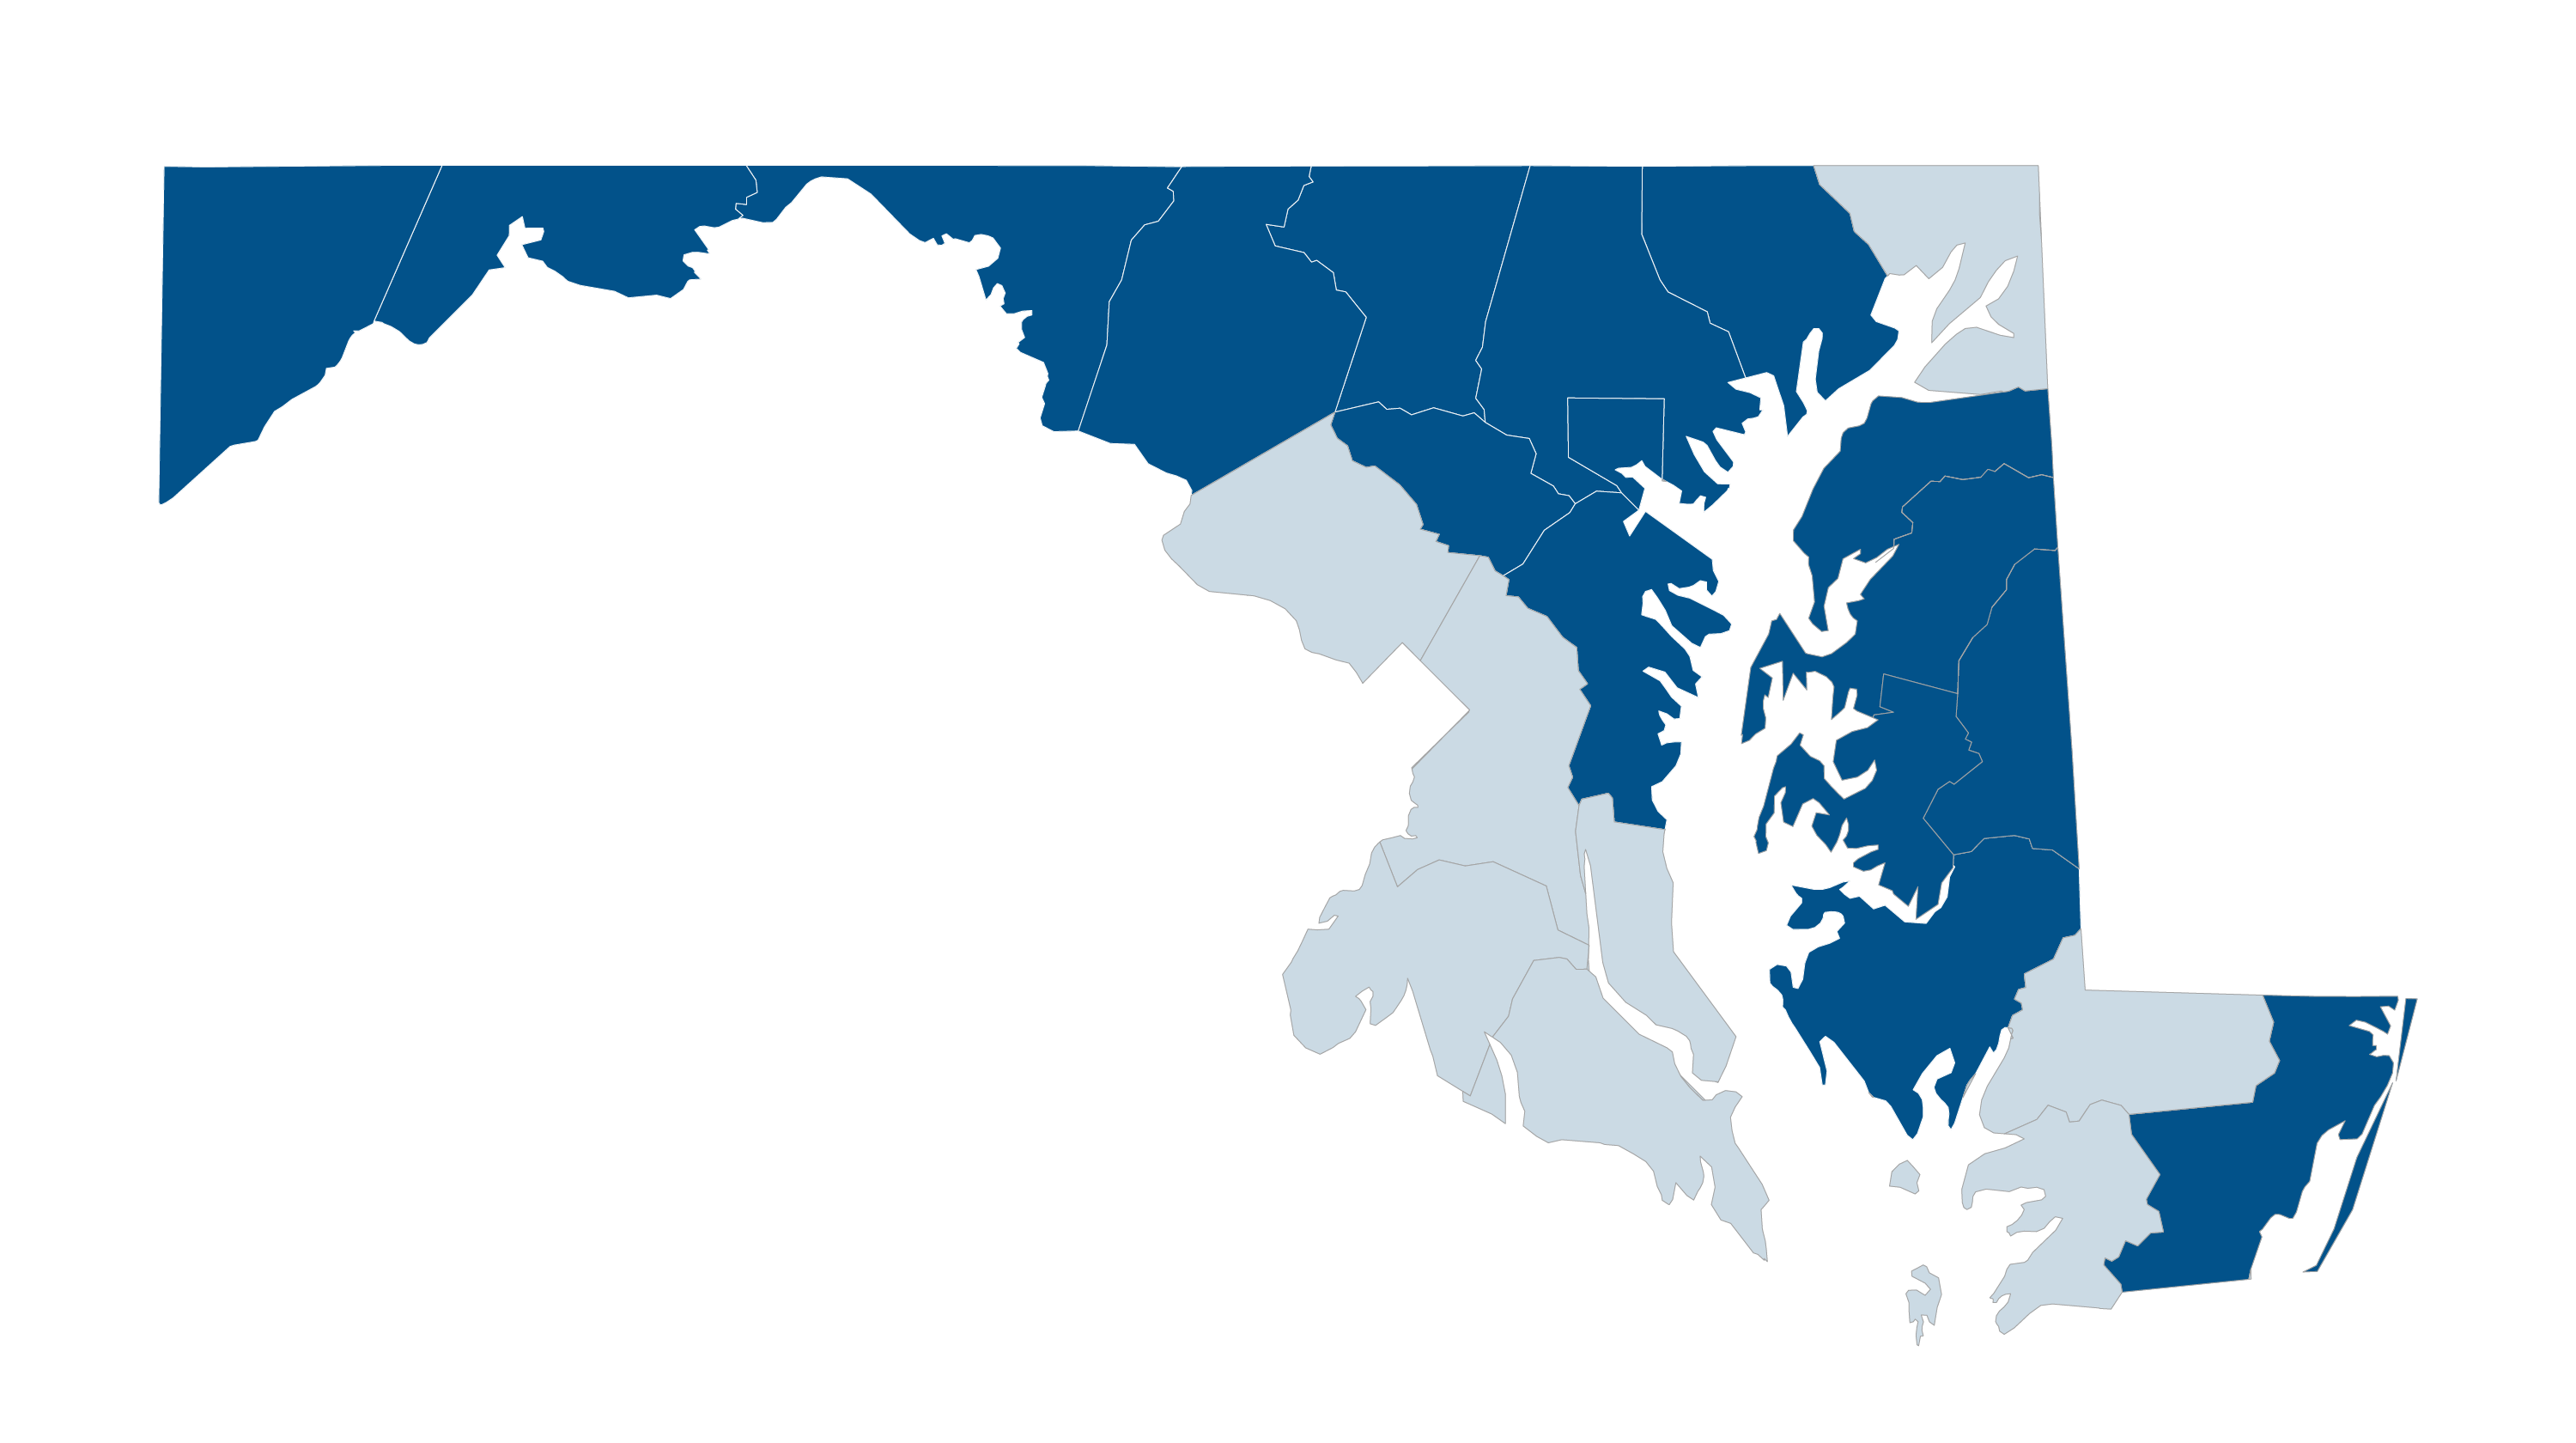 maryland counties map